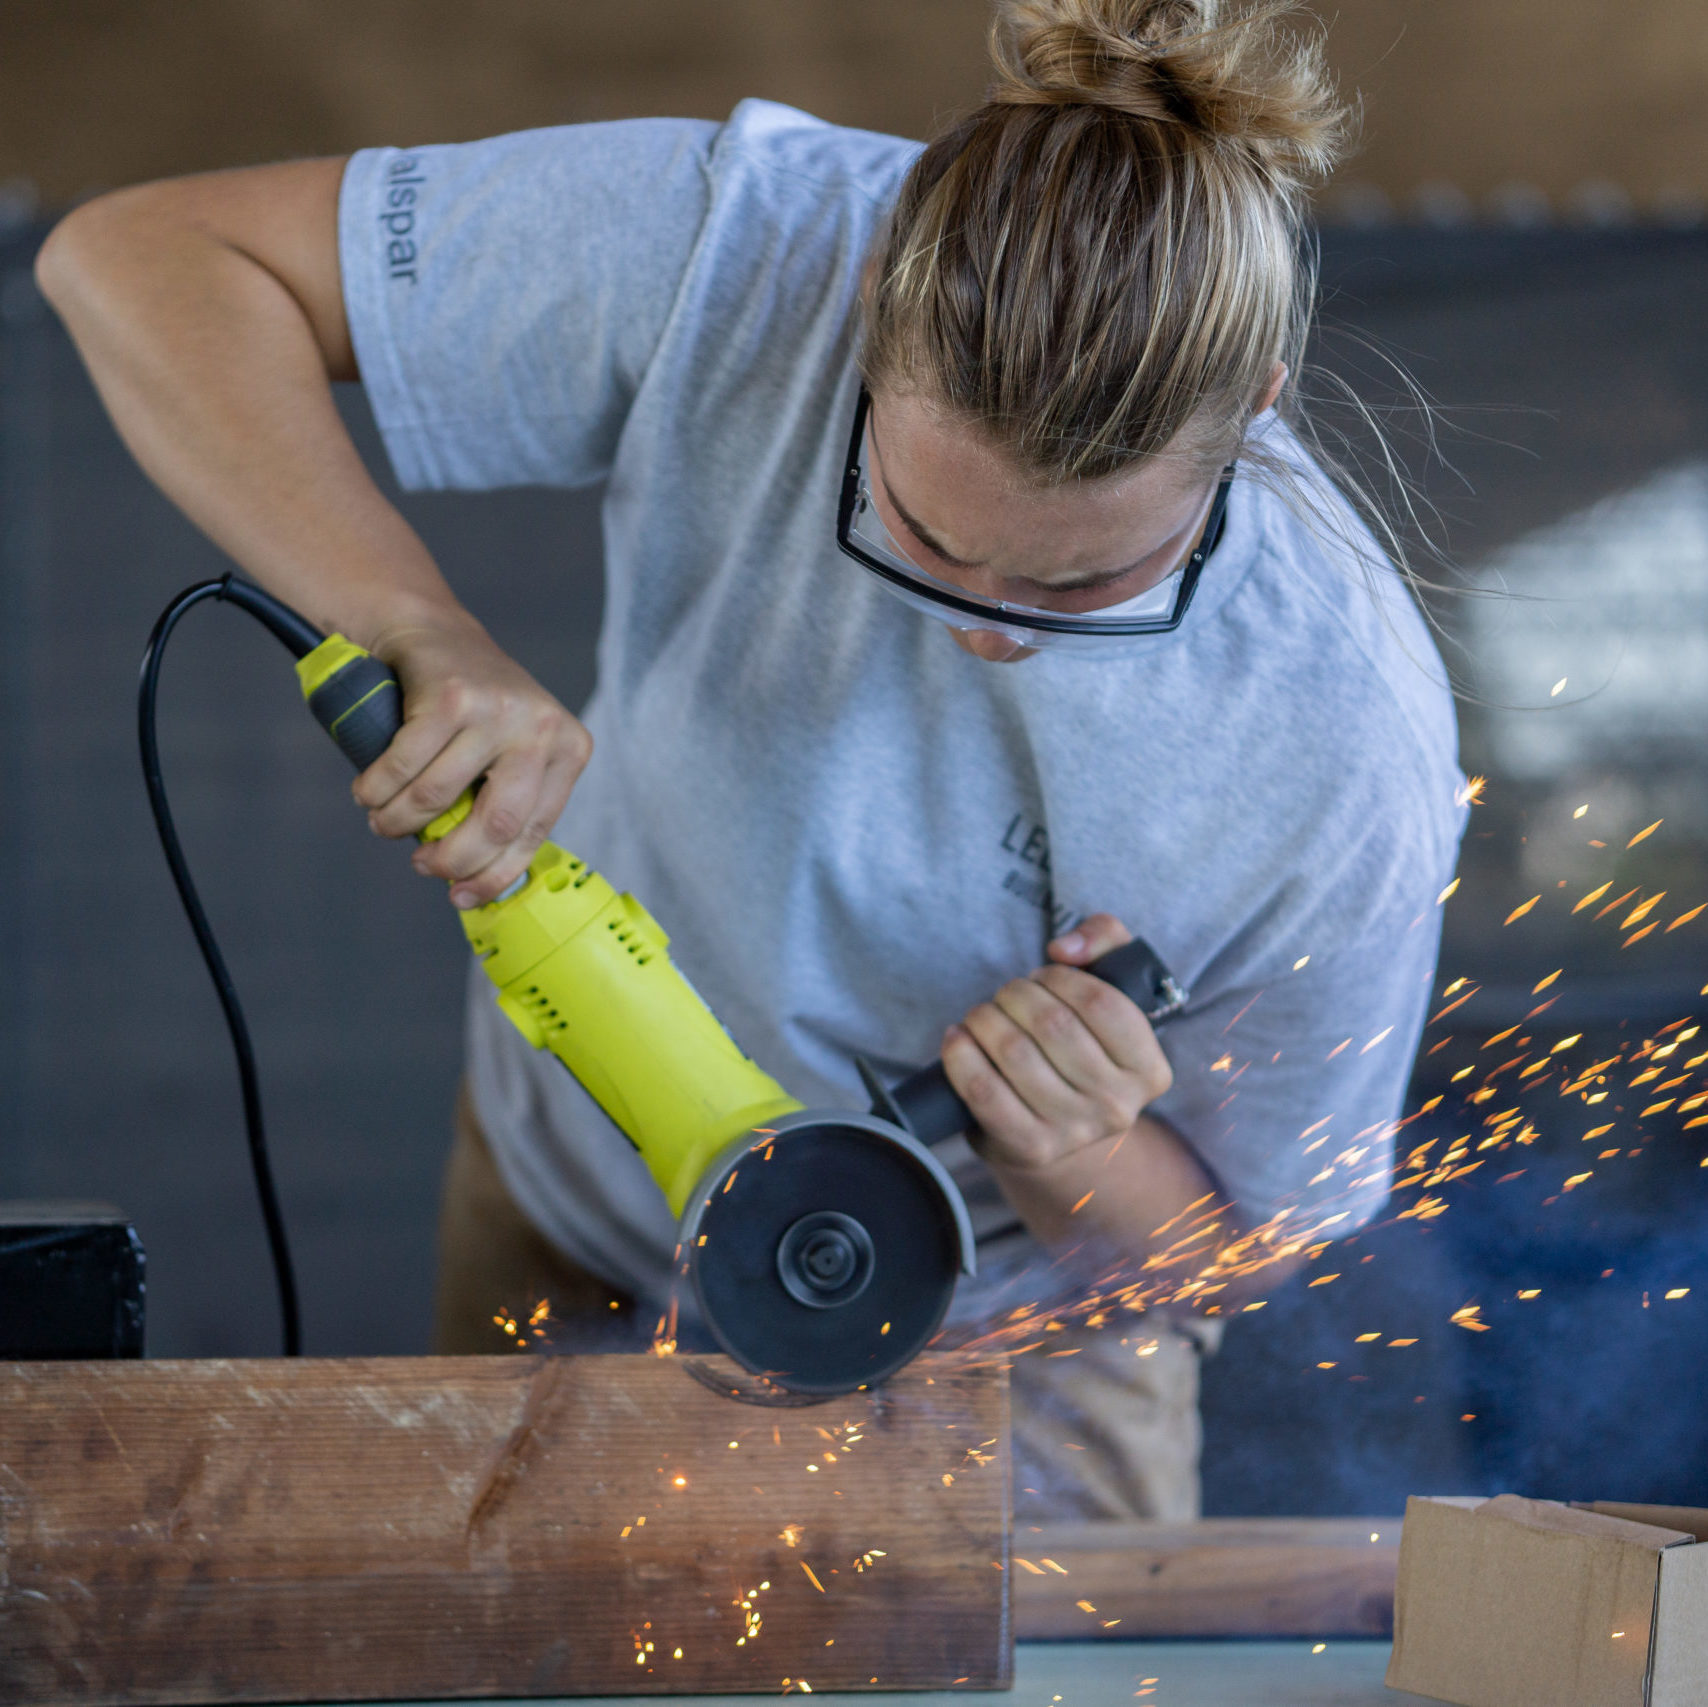 Image of THIMBY volunteer with an angle grinder